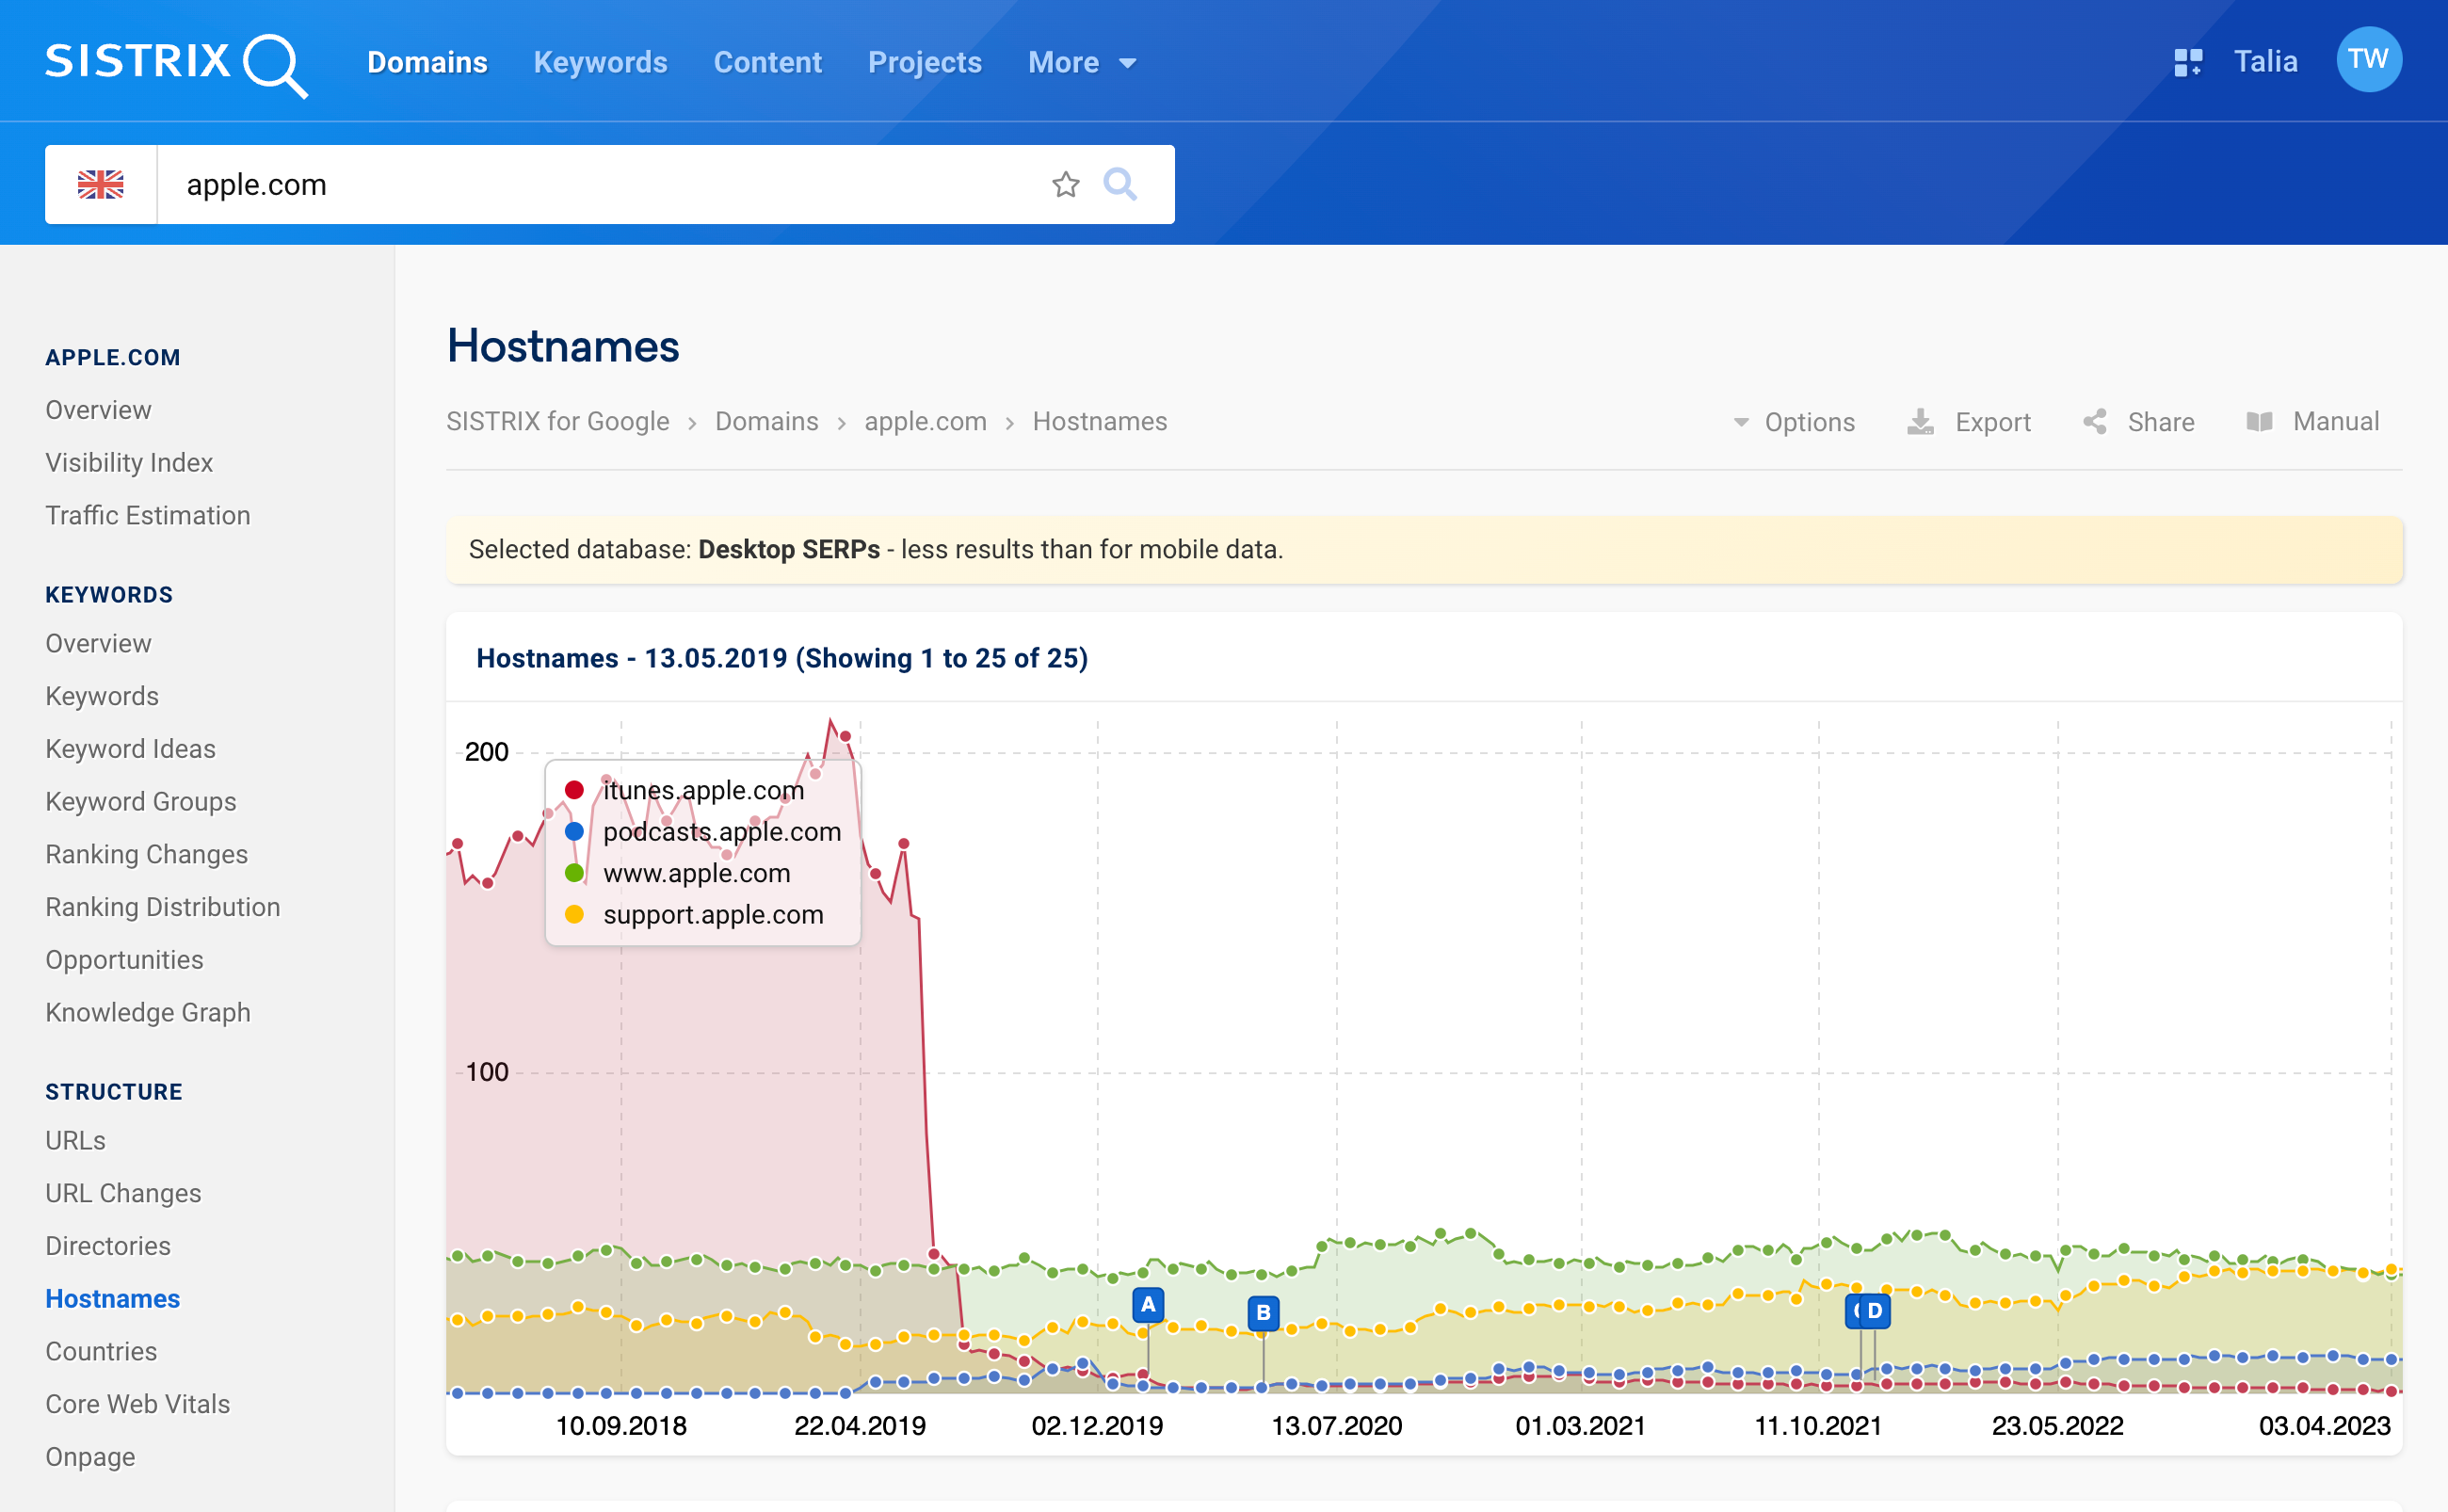 The visibility history of the hosts of the apple.com domain shows that the host itunes was by far the strongest host on May 13th, 2019. Shortly afterwards, however, it collapsed to almost 0.